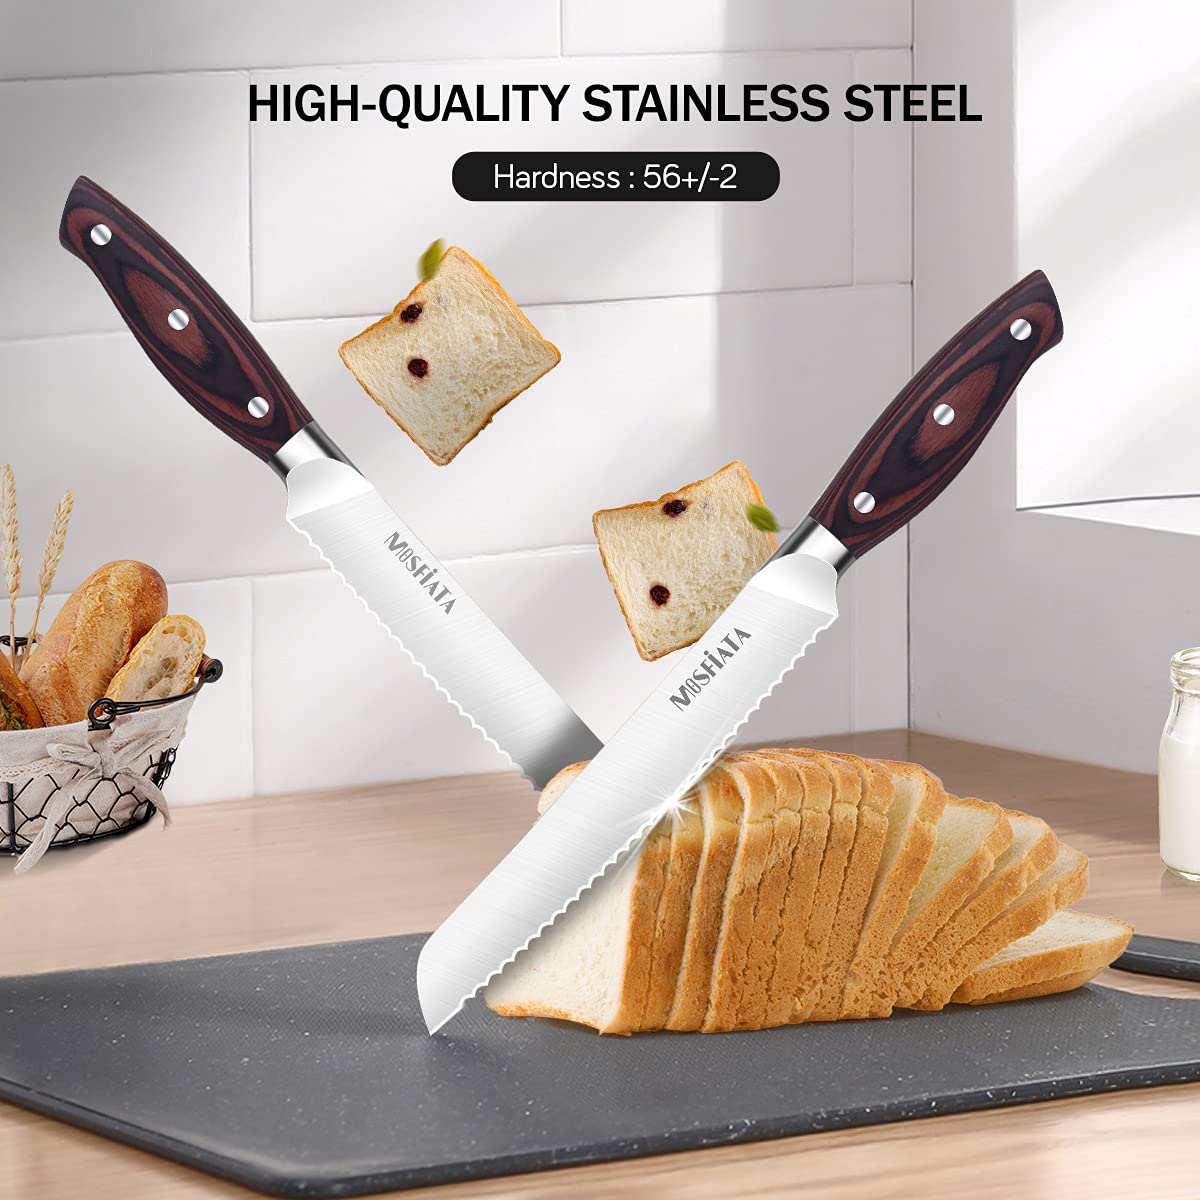 MOSFiATA Bread Knife 8 Inch Serrated Knife, 5Cr15Mov High Carbon Stainless Steel Bread Cutter with Ergonomic Pakkawood Handle, Full Tang Bread Slicer with Sheath, Ideal for Cake, Bagel, Sandwich